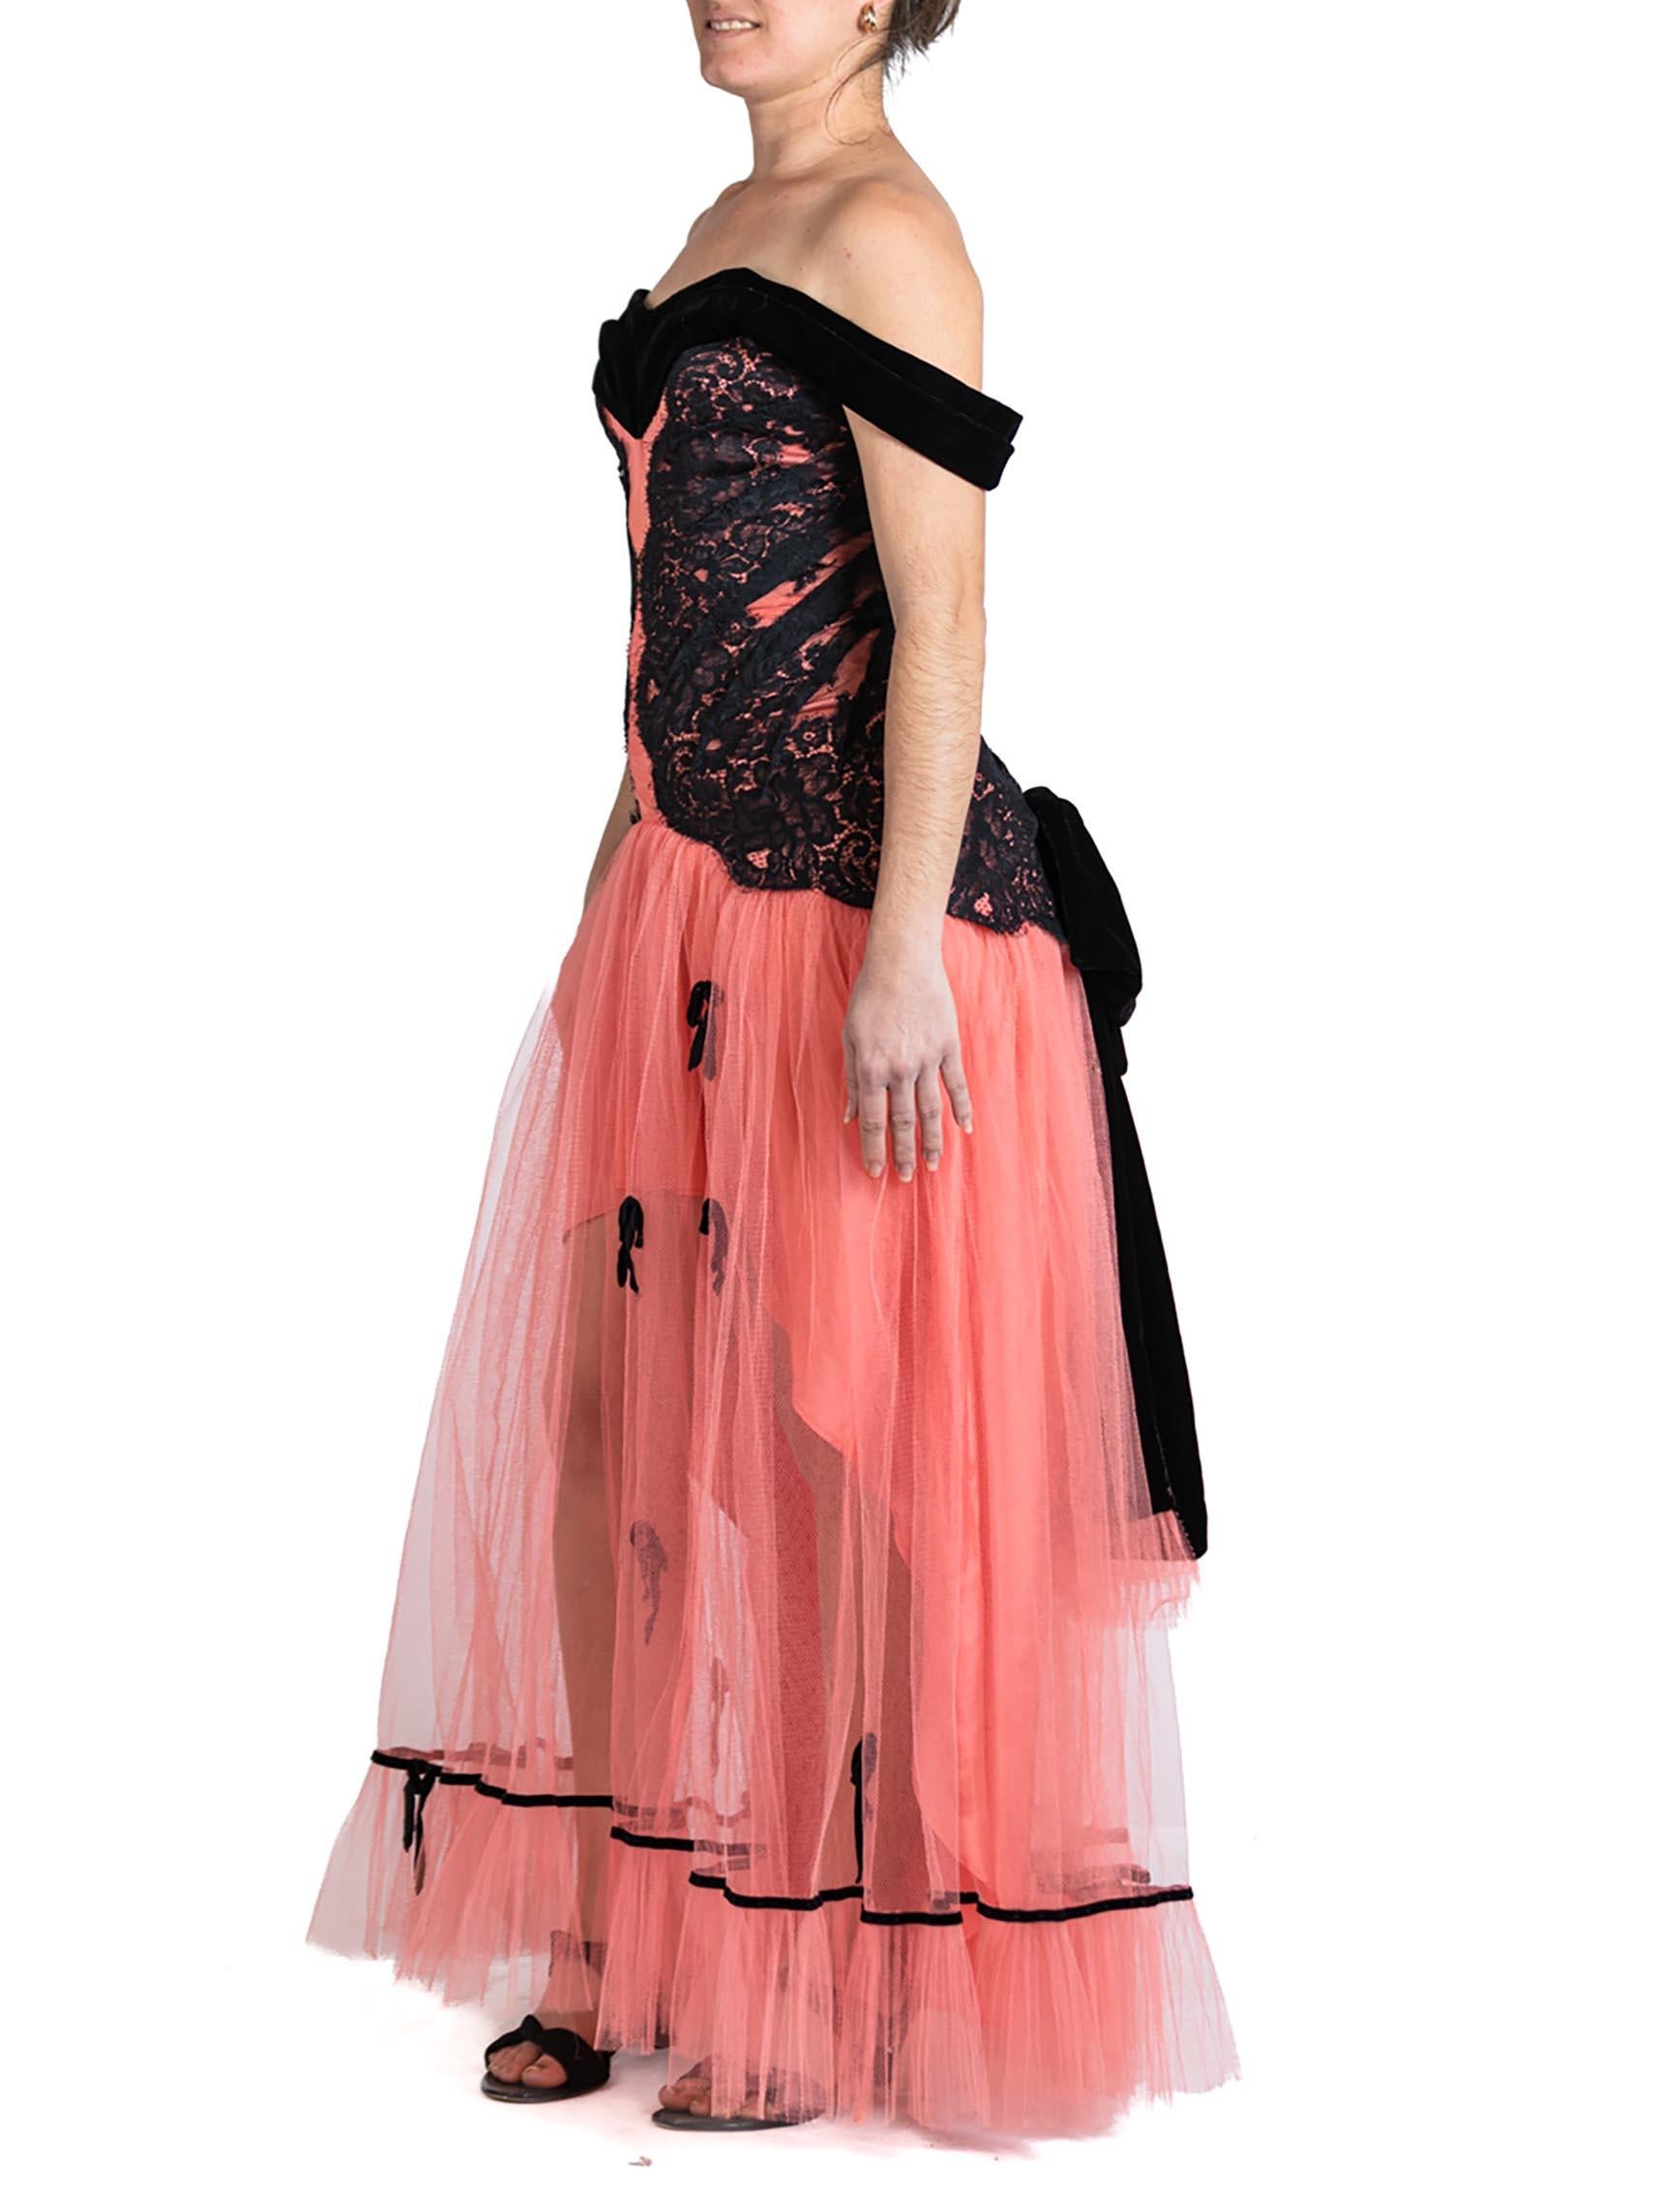 MORPHEW ATELIER Salmon Pink & Black Rayon Blend Tulle Lace Gown With Velvet Bow Neckline